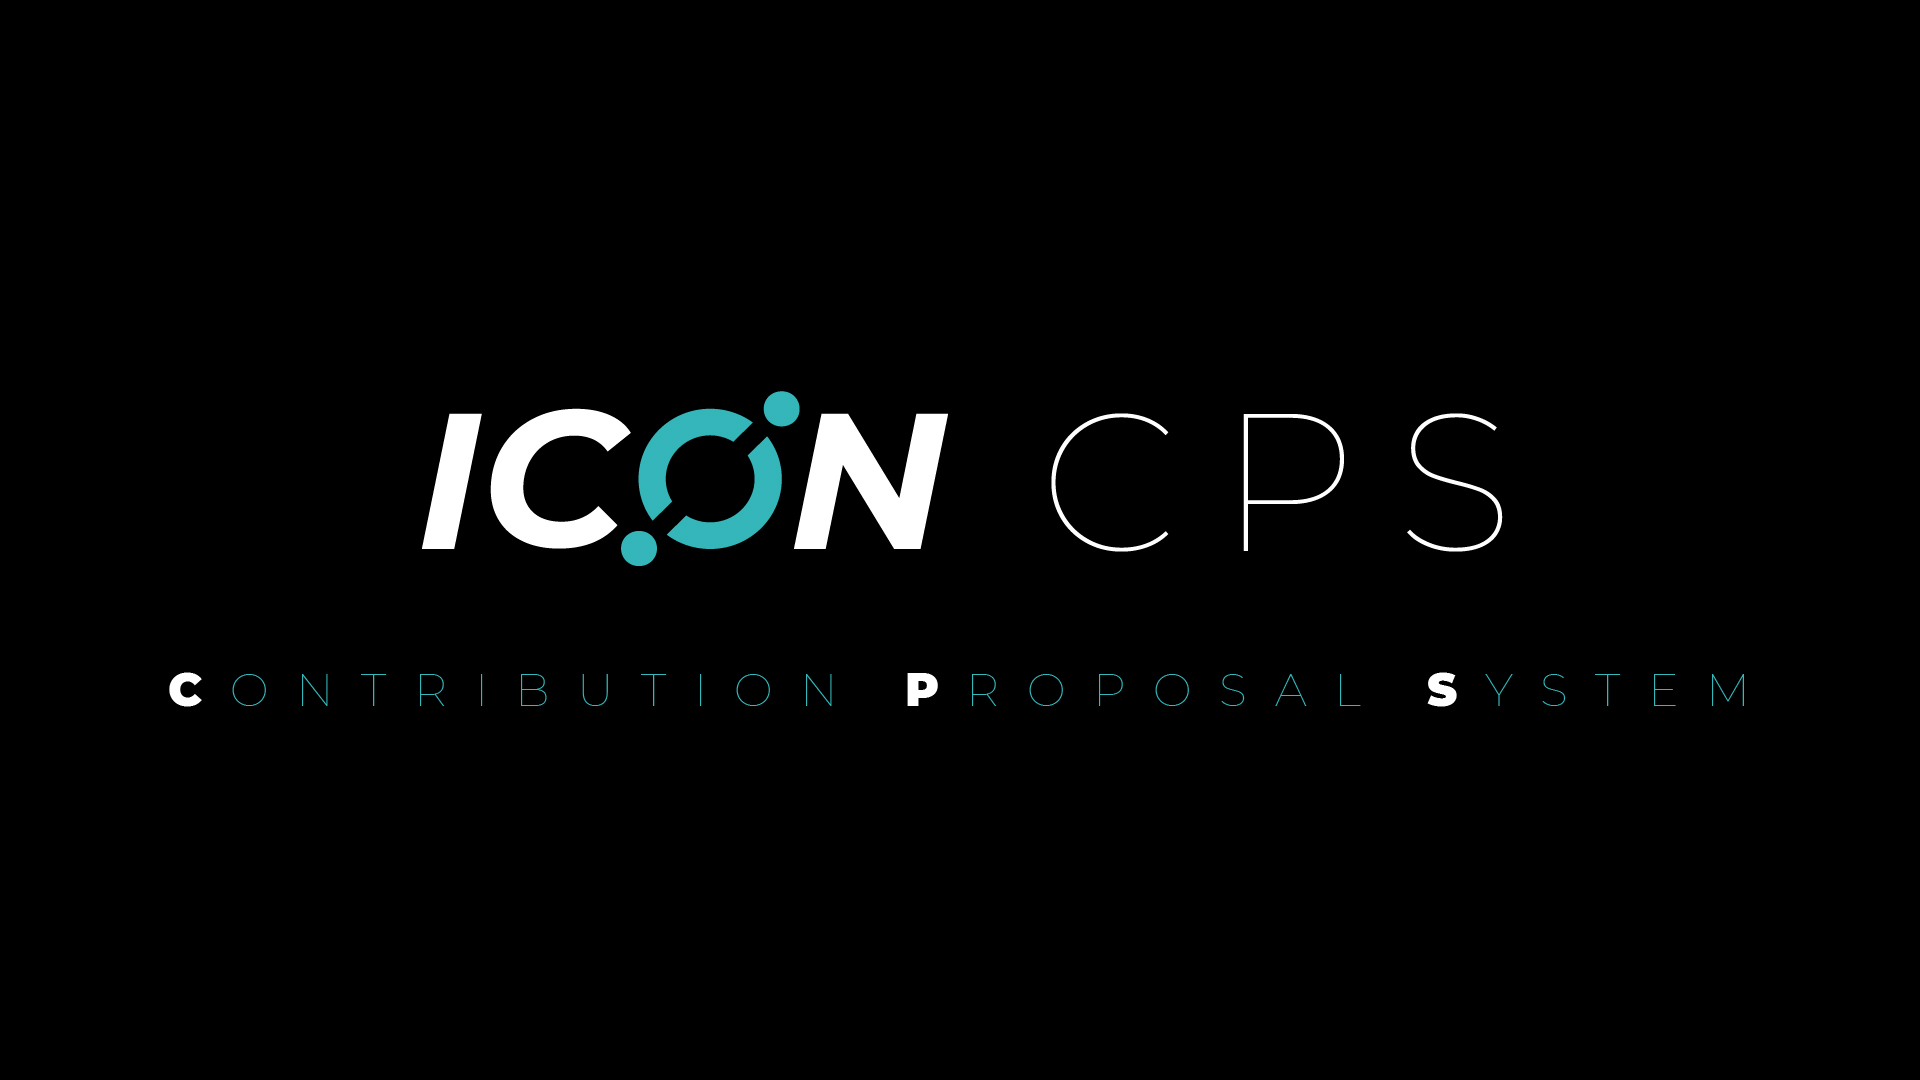 ICON’s Contribution Proposal System (CPS) is a decentralized grant program operated by validators on the ICON network.